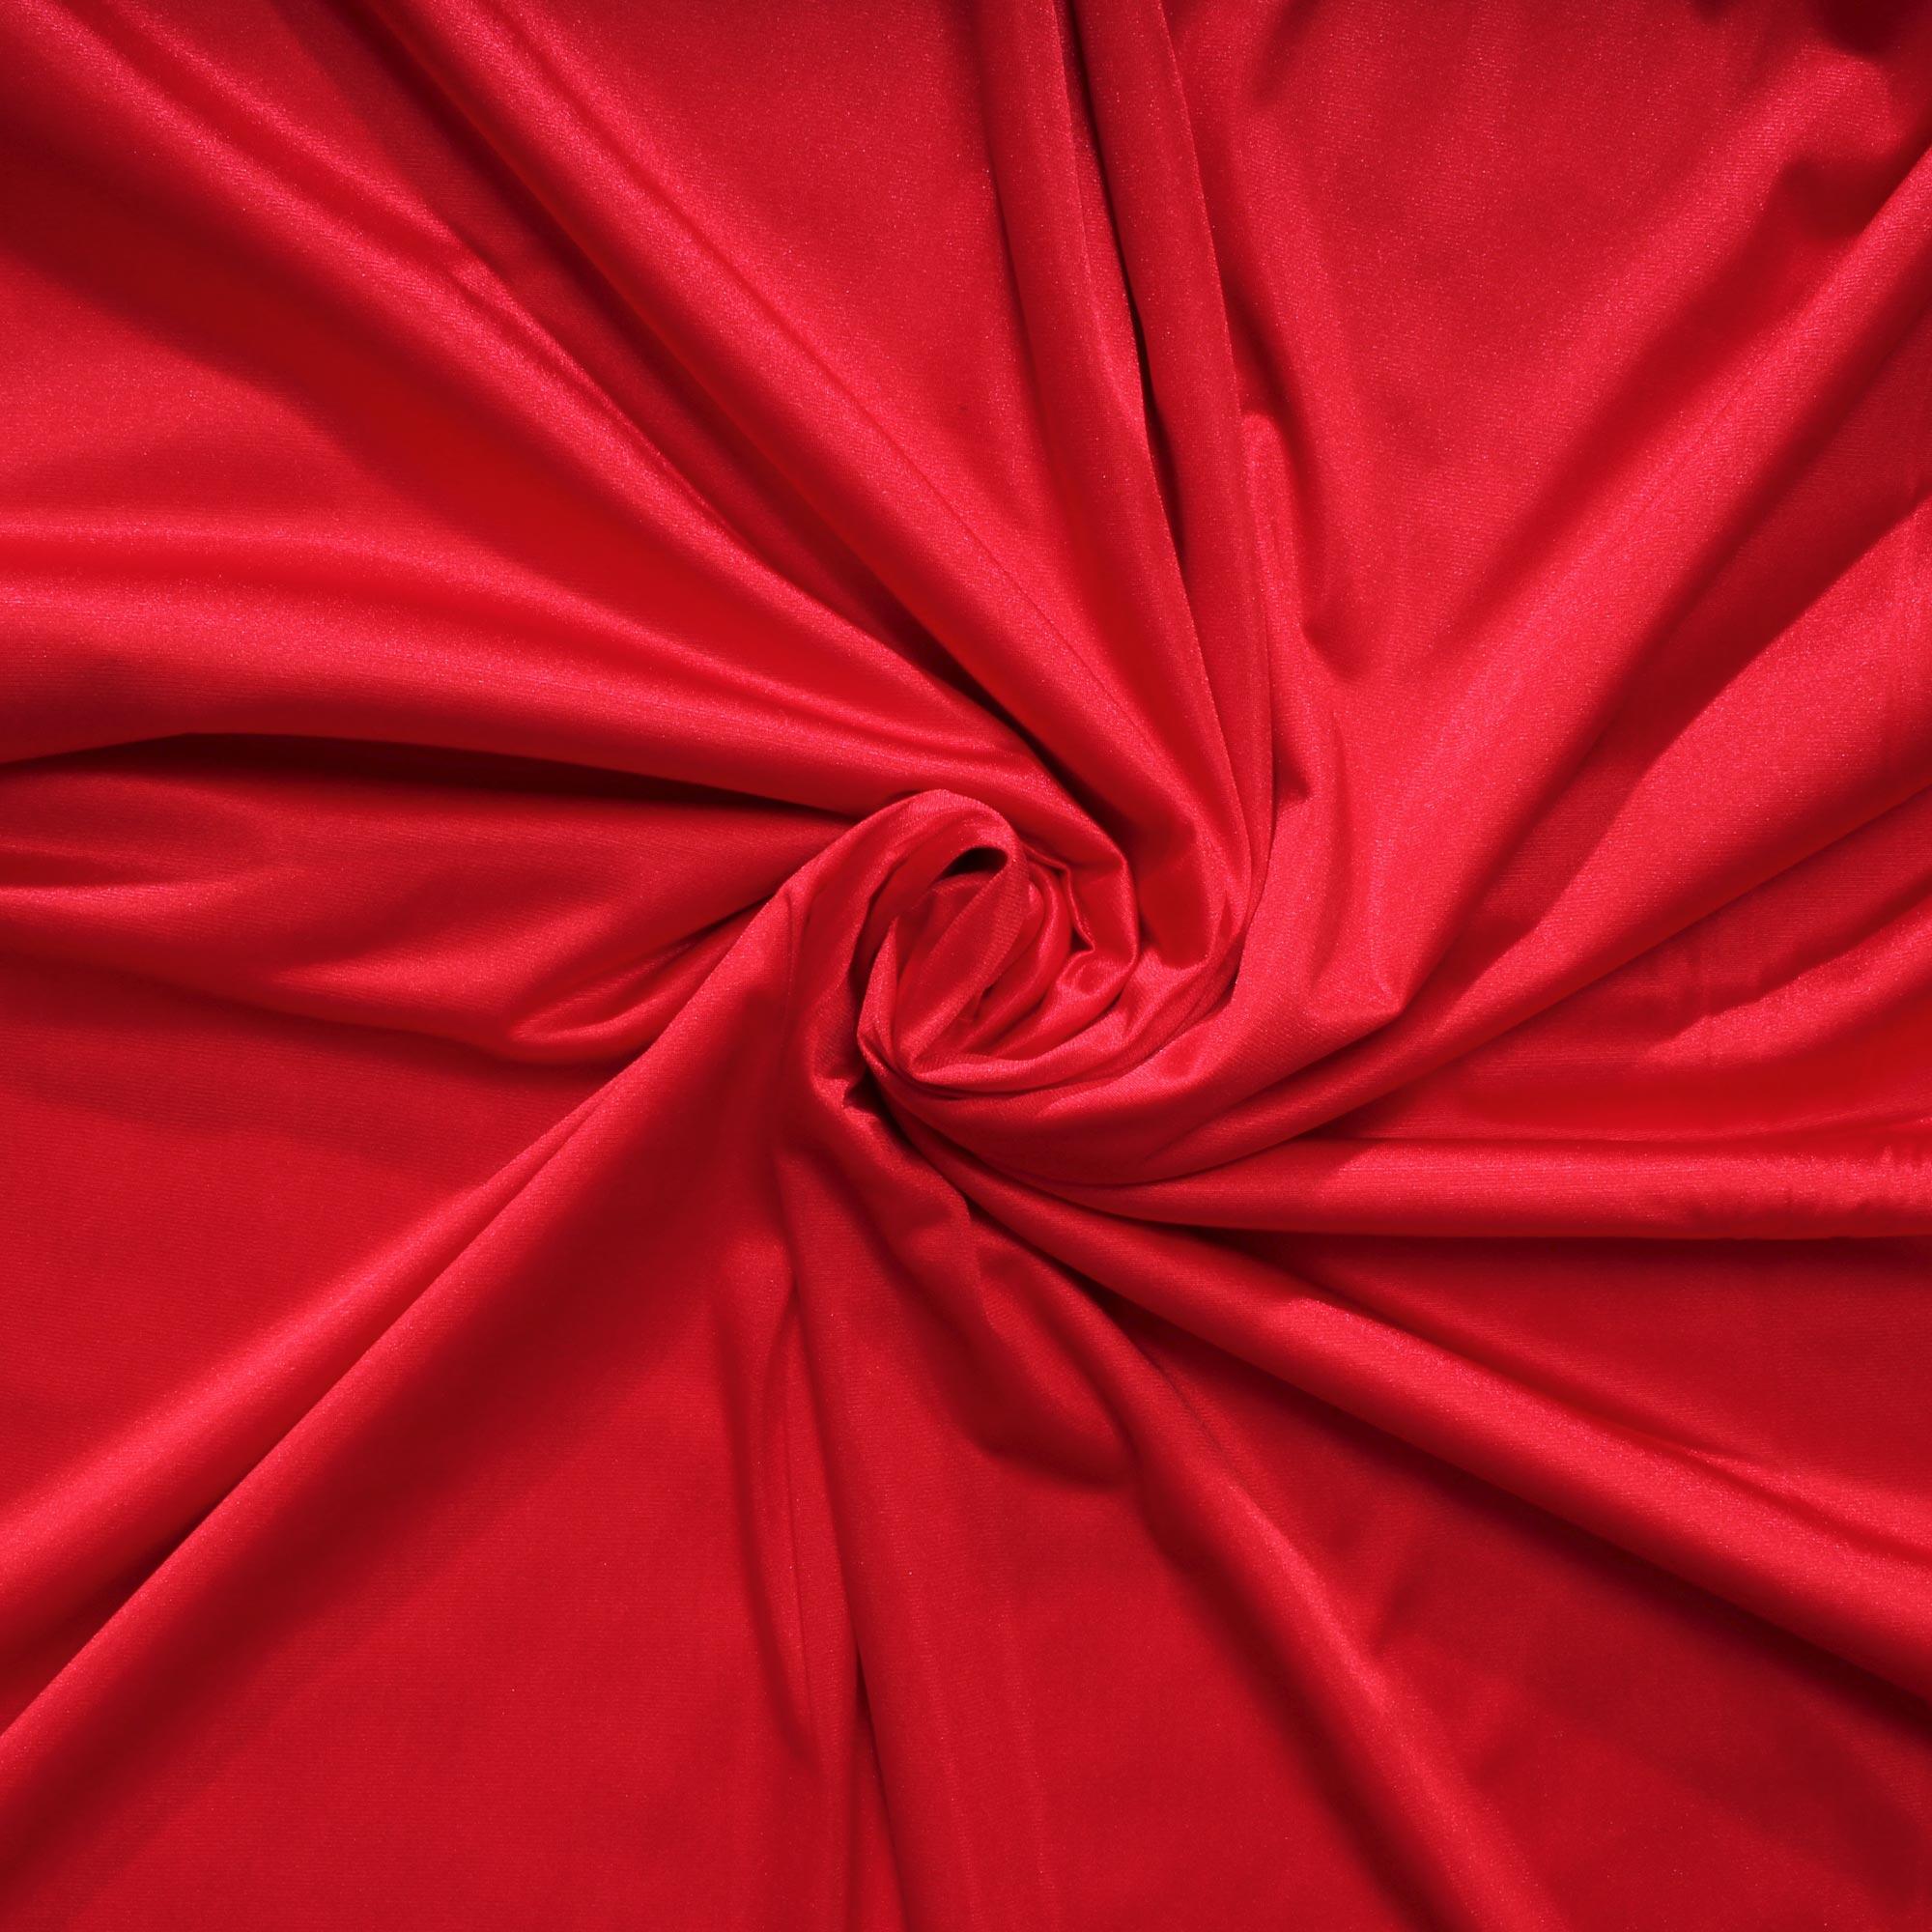 Prodigy Aerial Silk (Aerial Fabric / Tissus) - Red 1/3